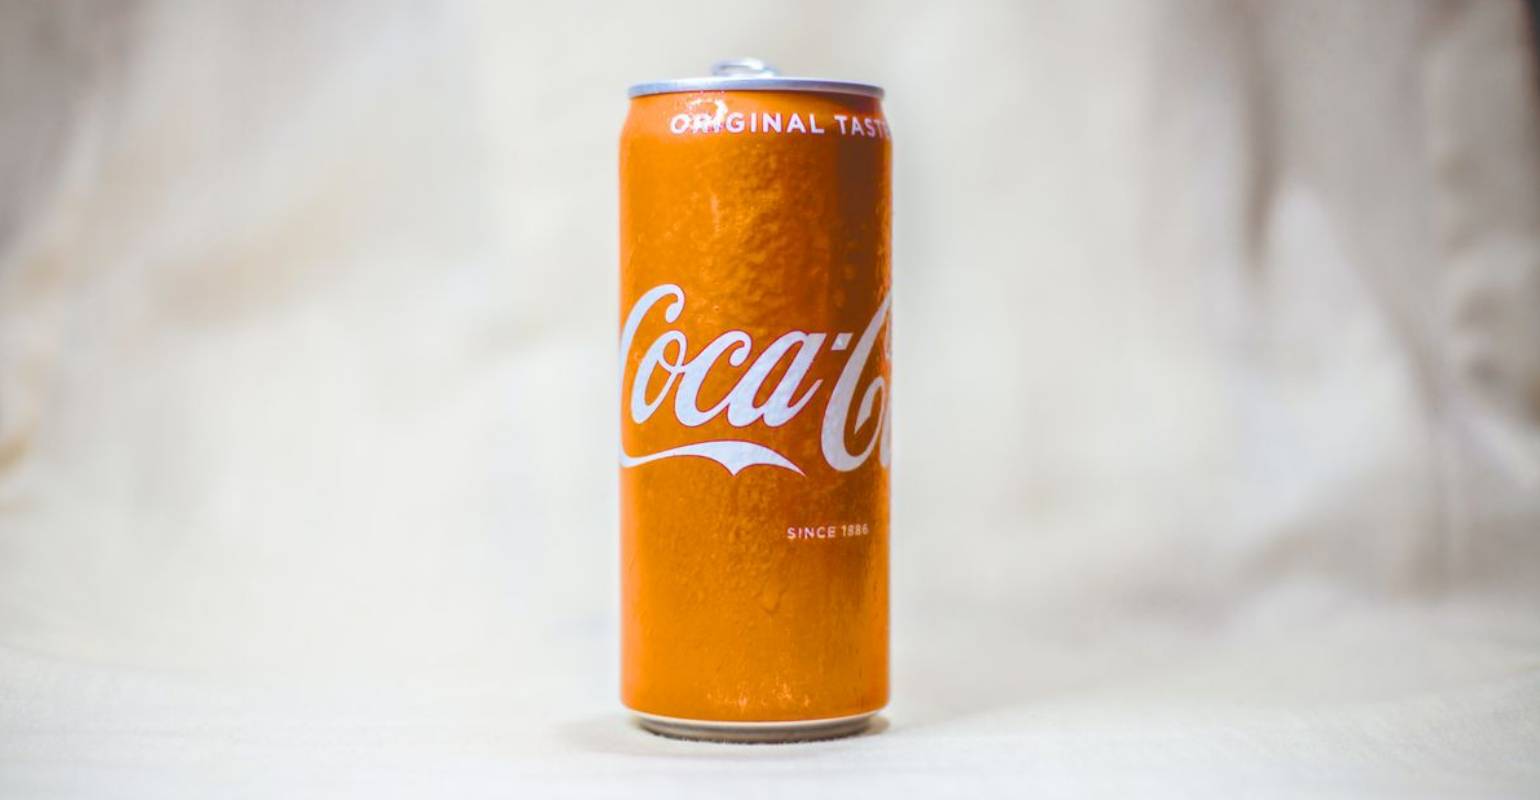 Coco cola in orange package